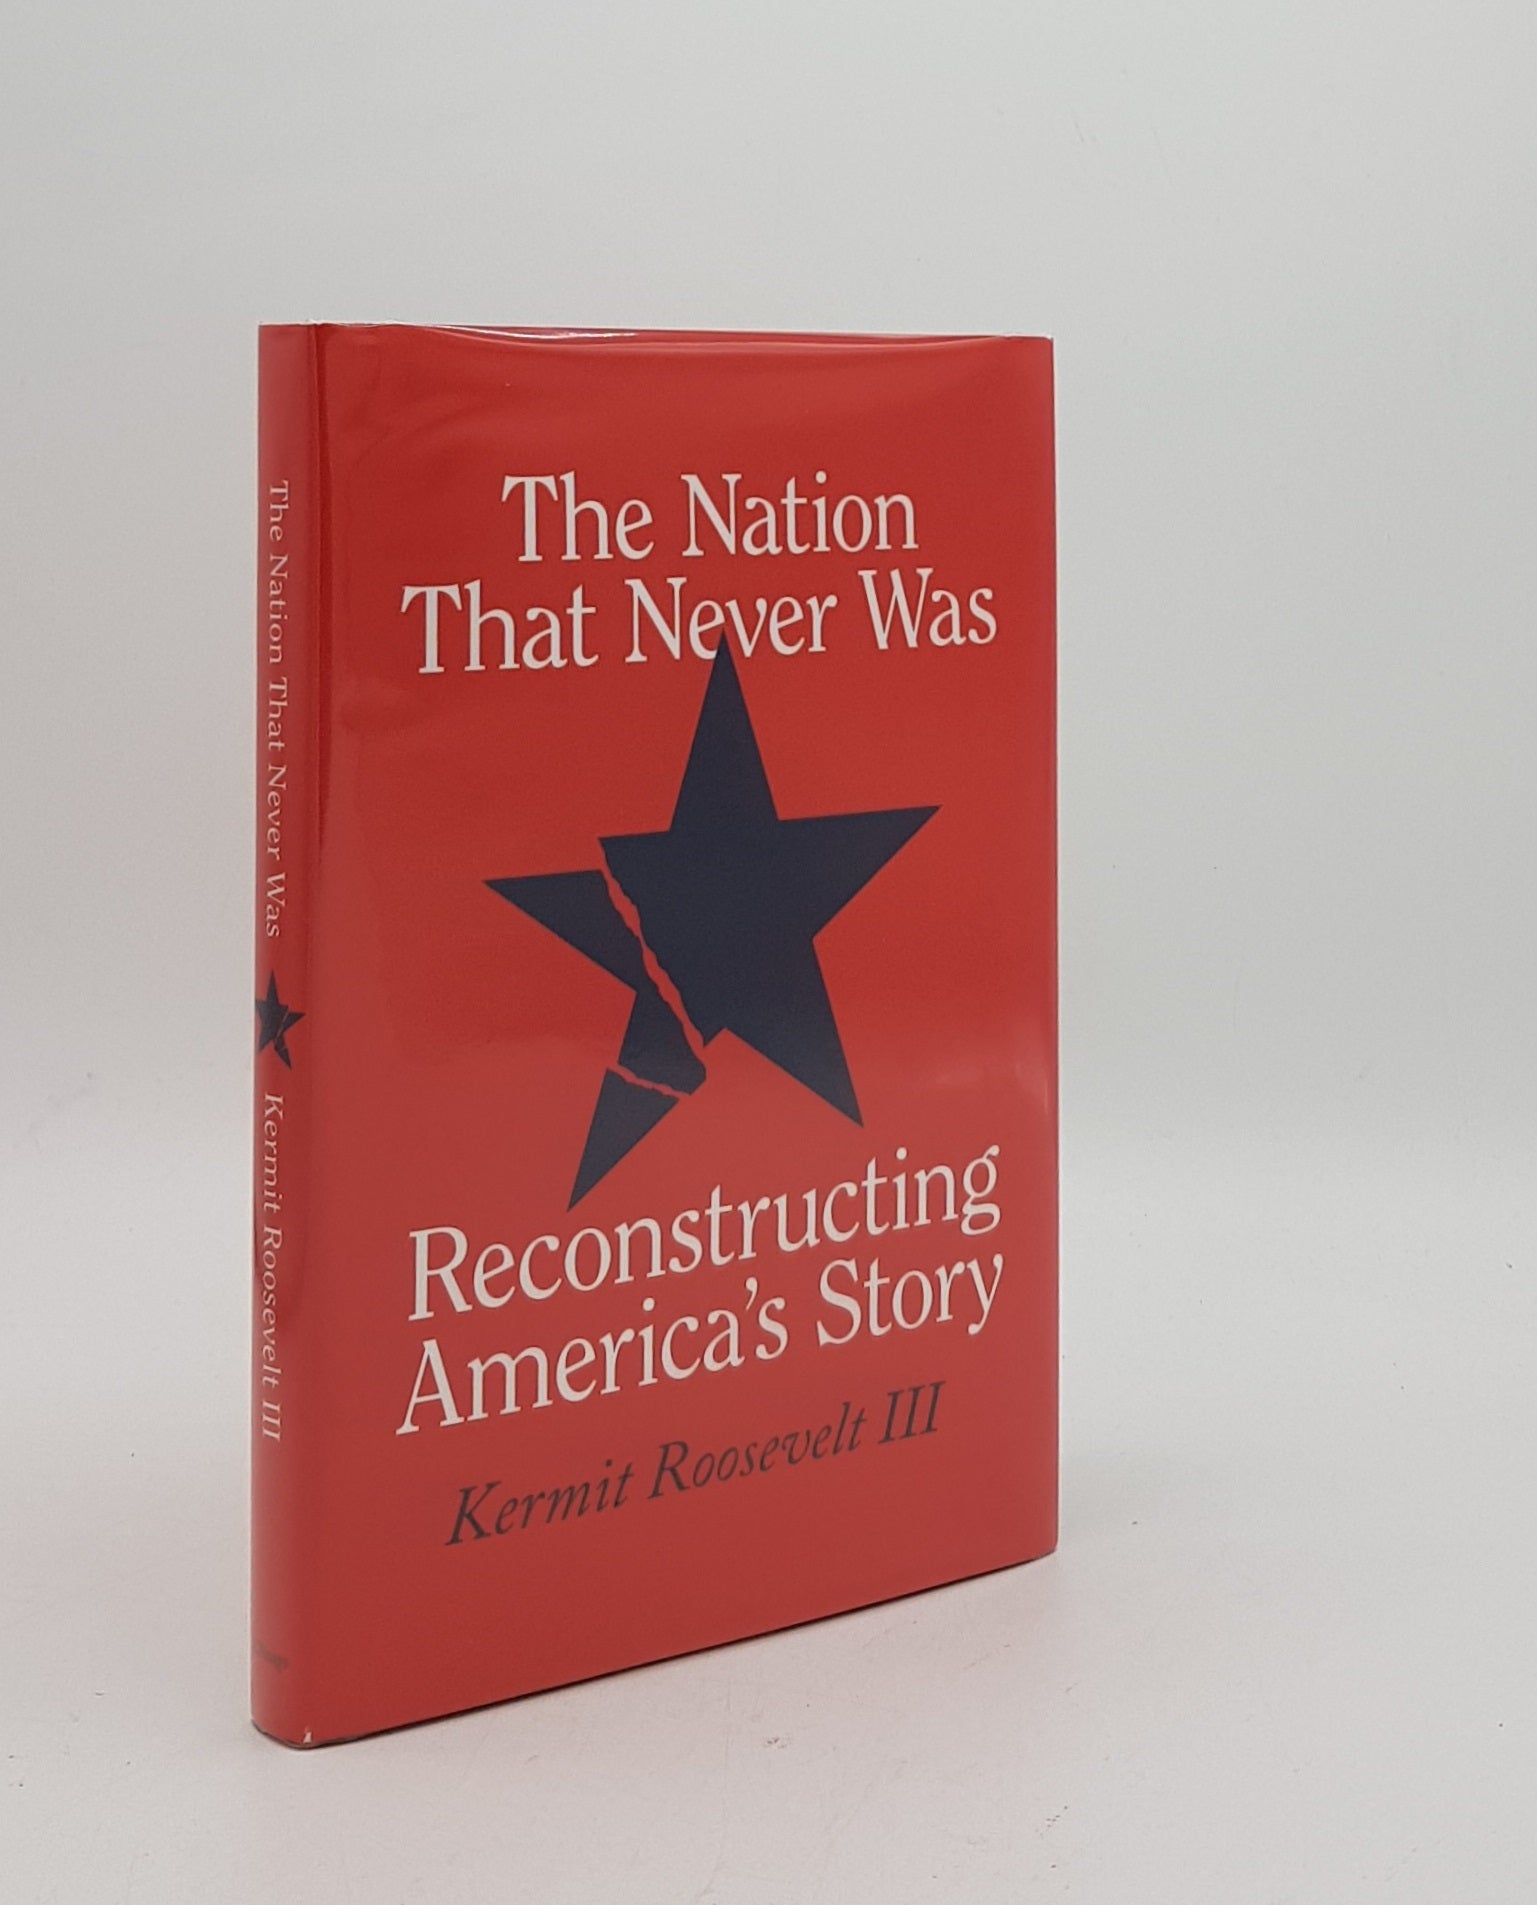 ROOSEVELT Kermit III - The Nation That Never Was Reconstructing America's Story